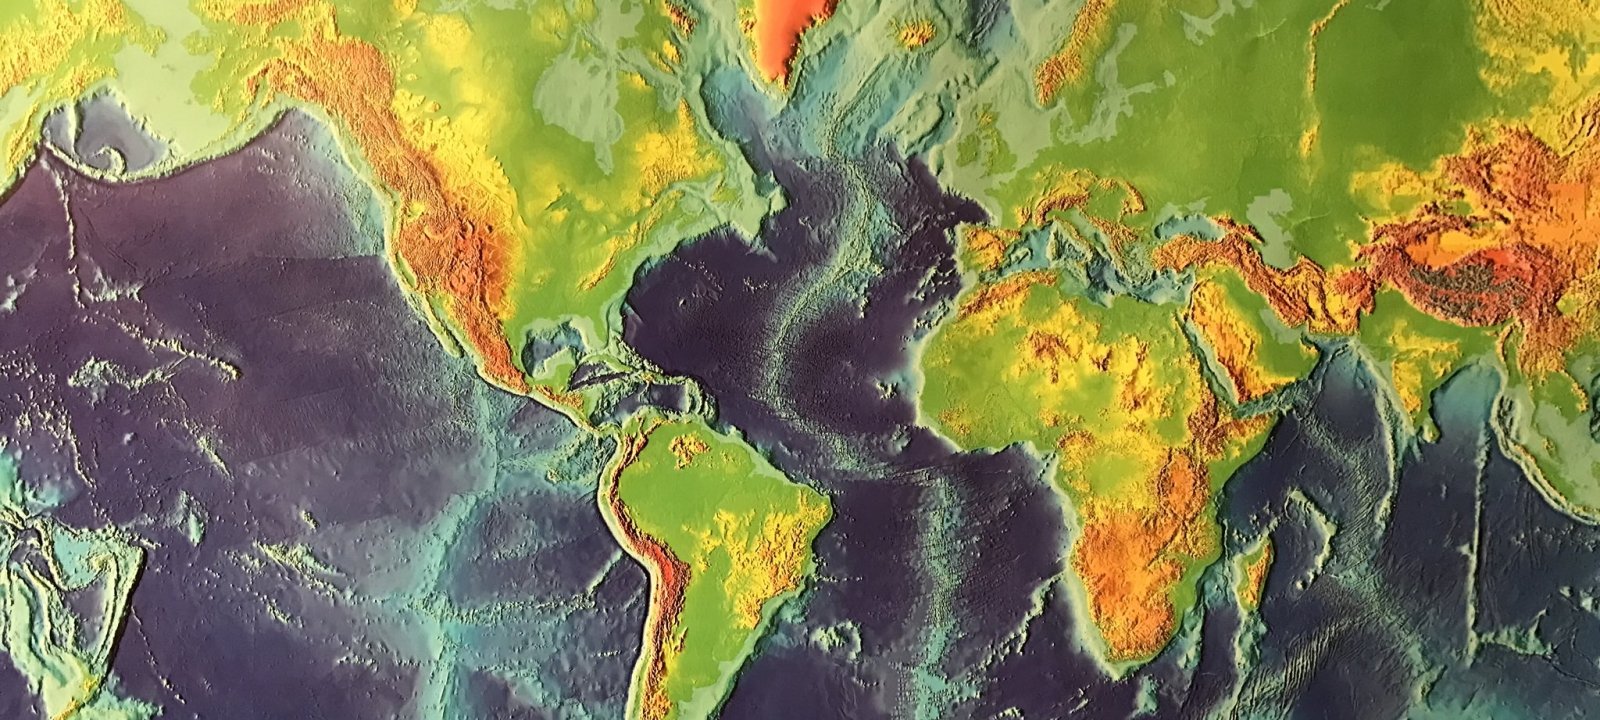 Relief Map of Earth